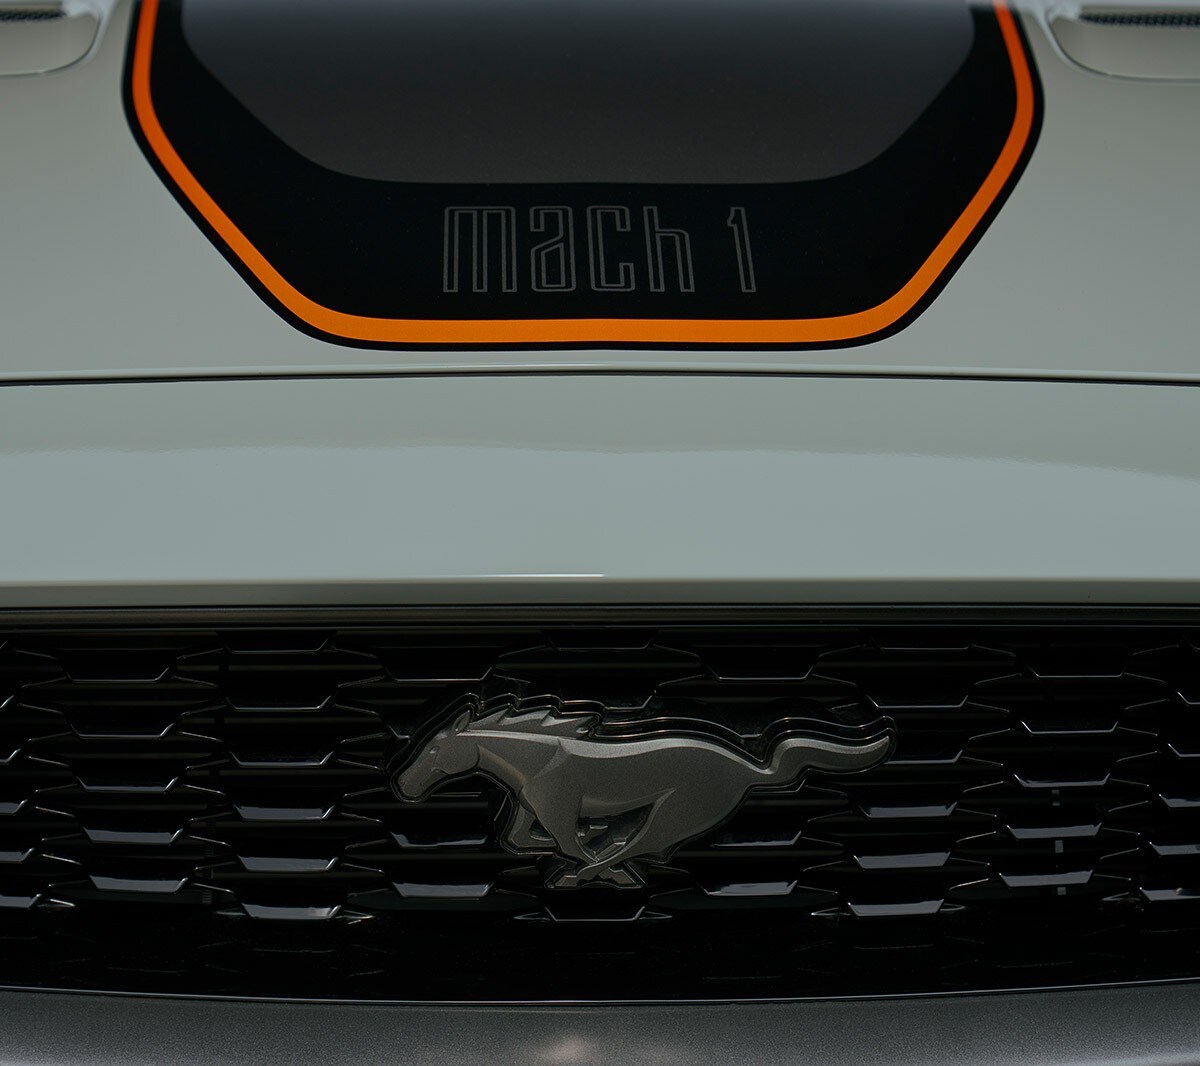 Ford Mustang Mach 1 branded grille close up